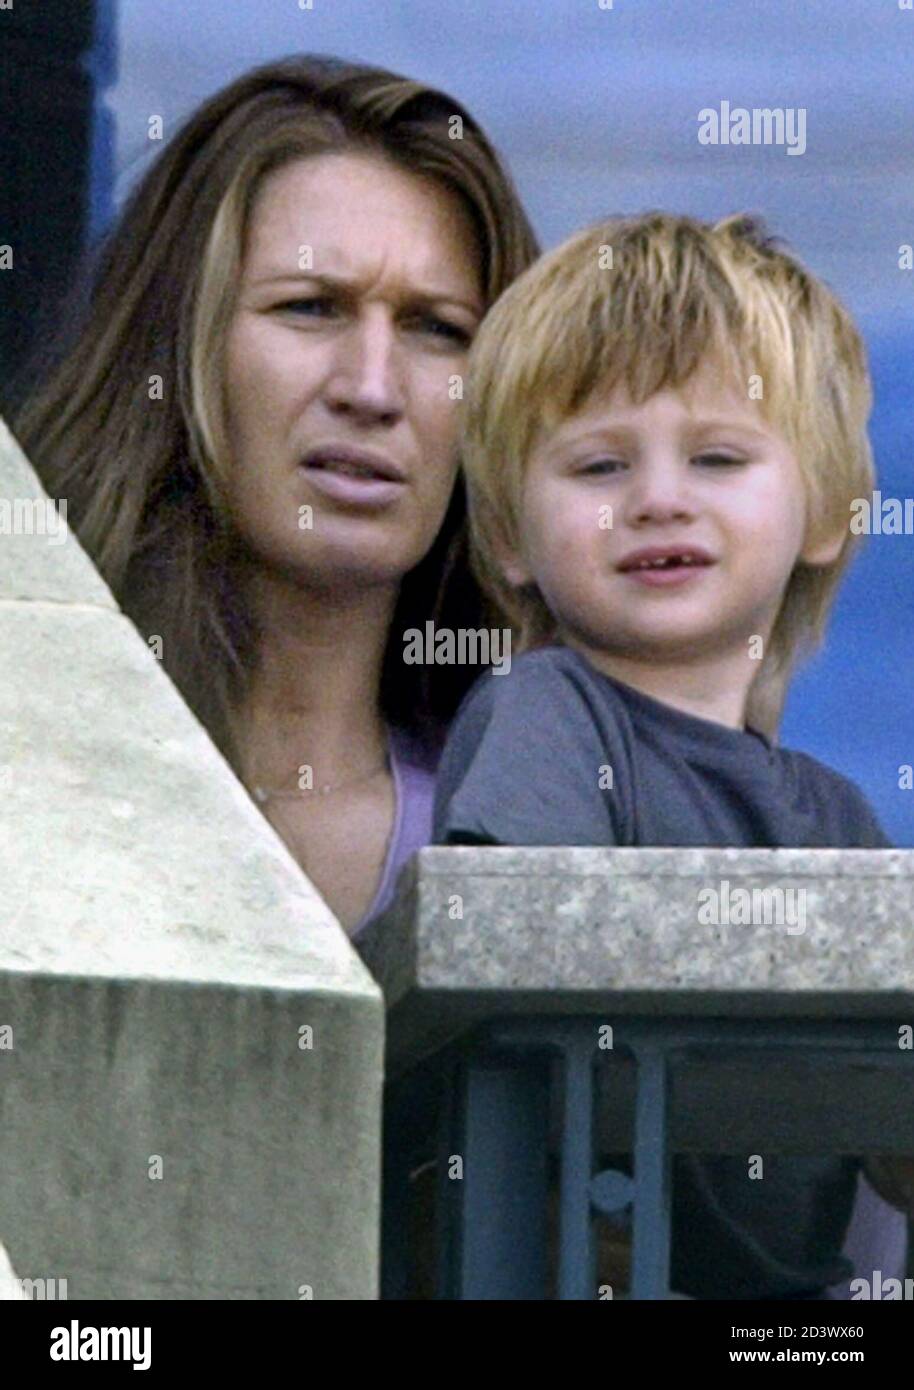 Steffi Graf (L) and her son Jaden Agassi watch Andre Agassi play Roger  Federer of Switzerland, in their quarter final match at the 2004 U.S. Open  in New York, September 9, 2004.